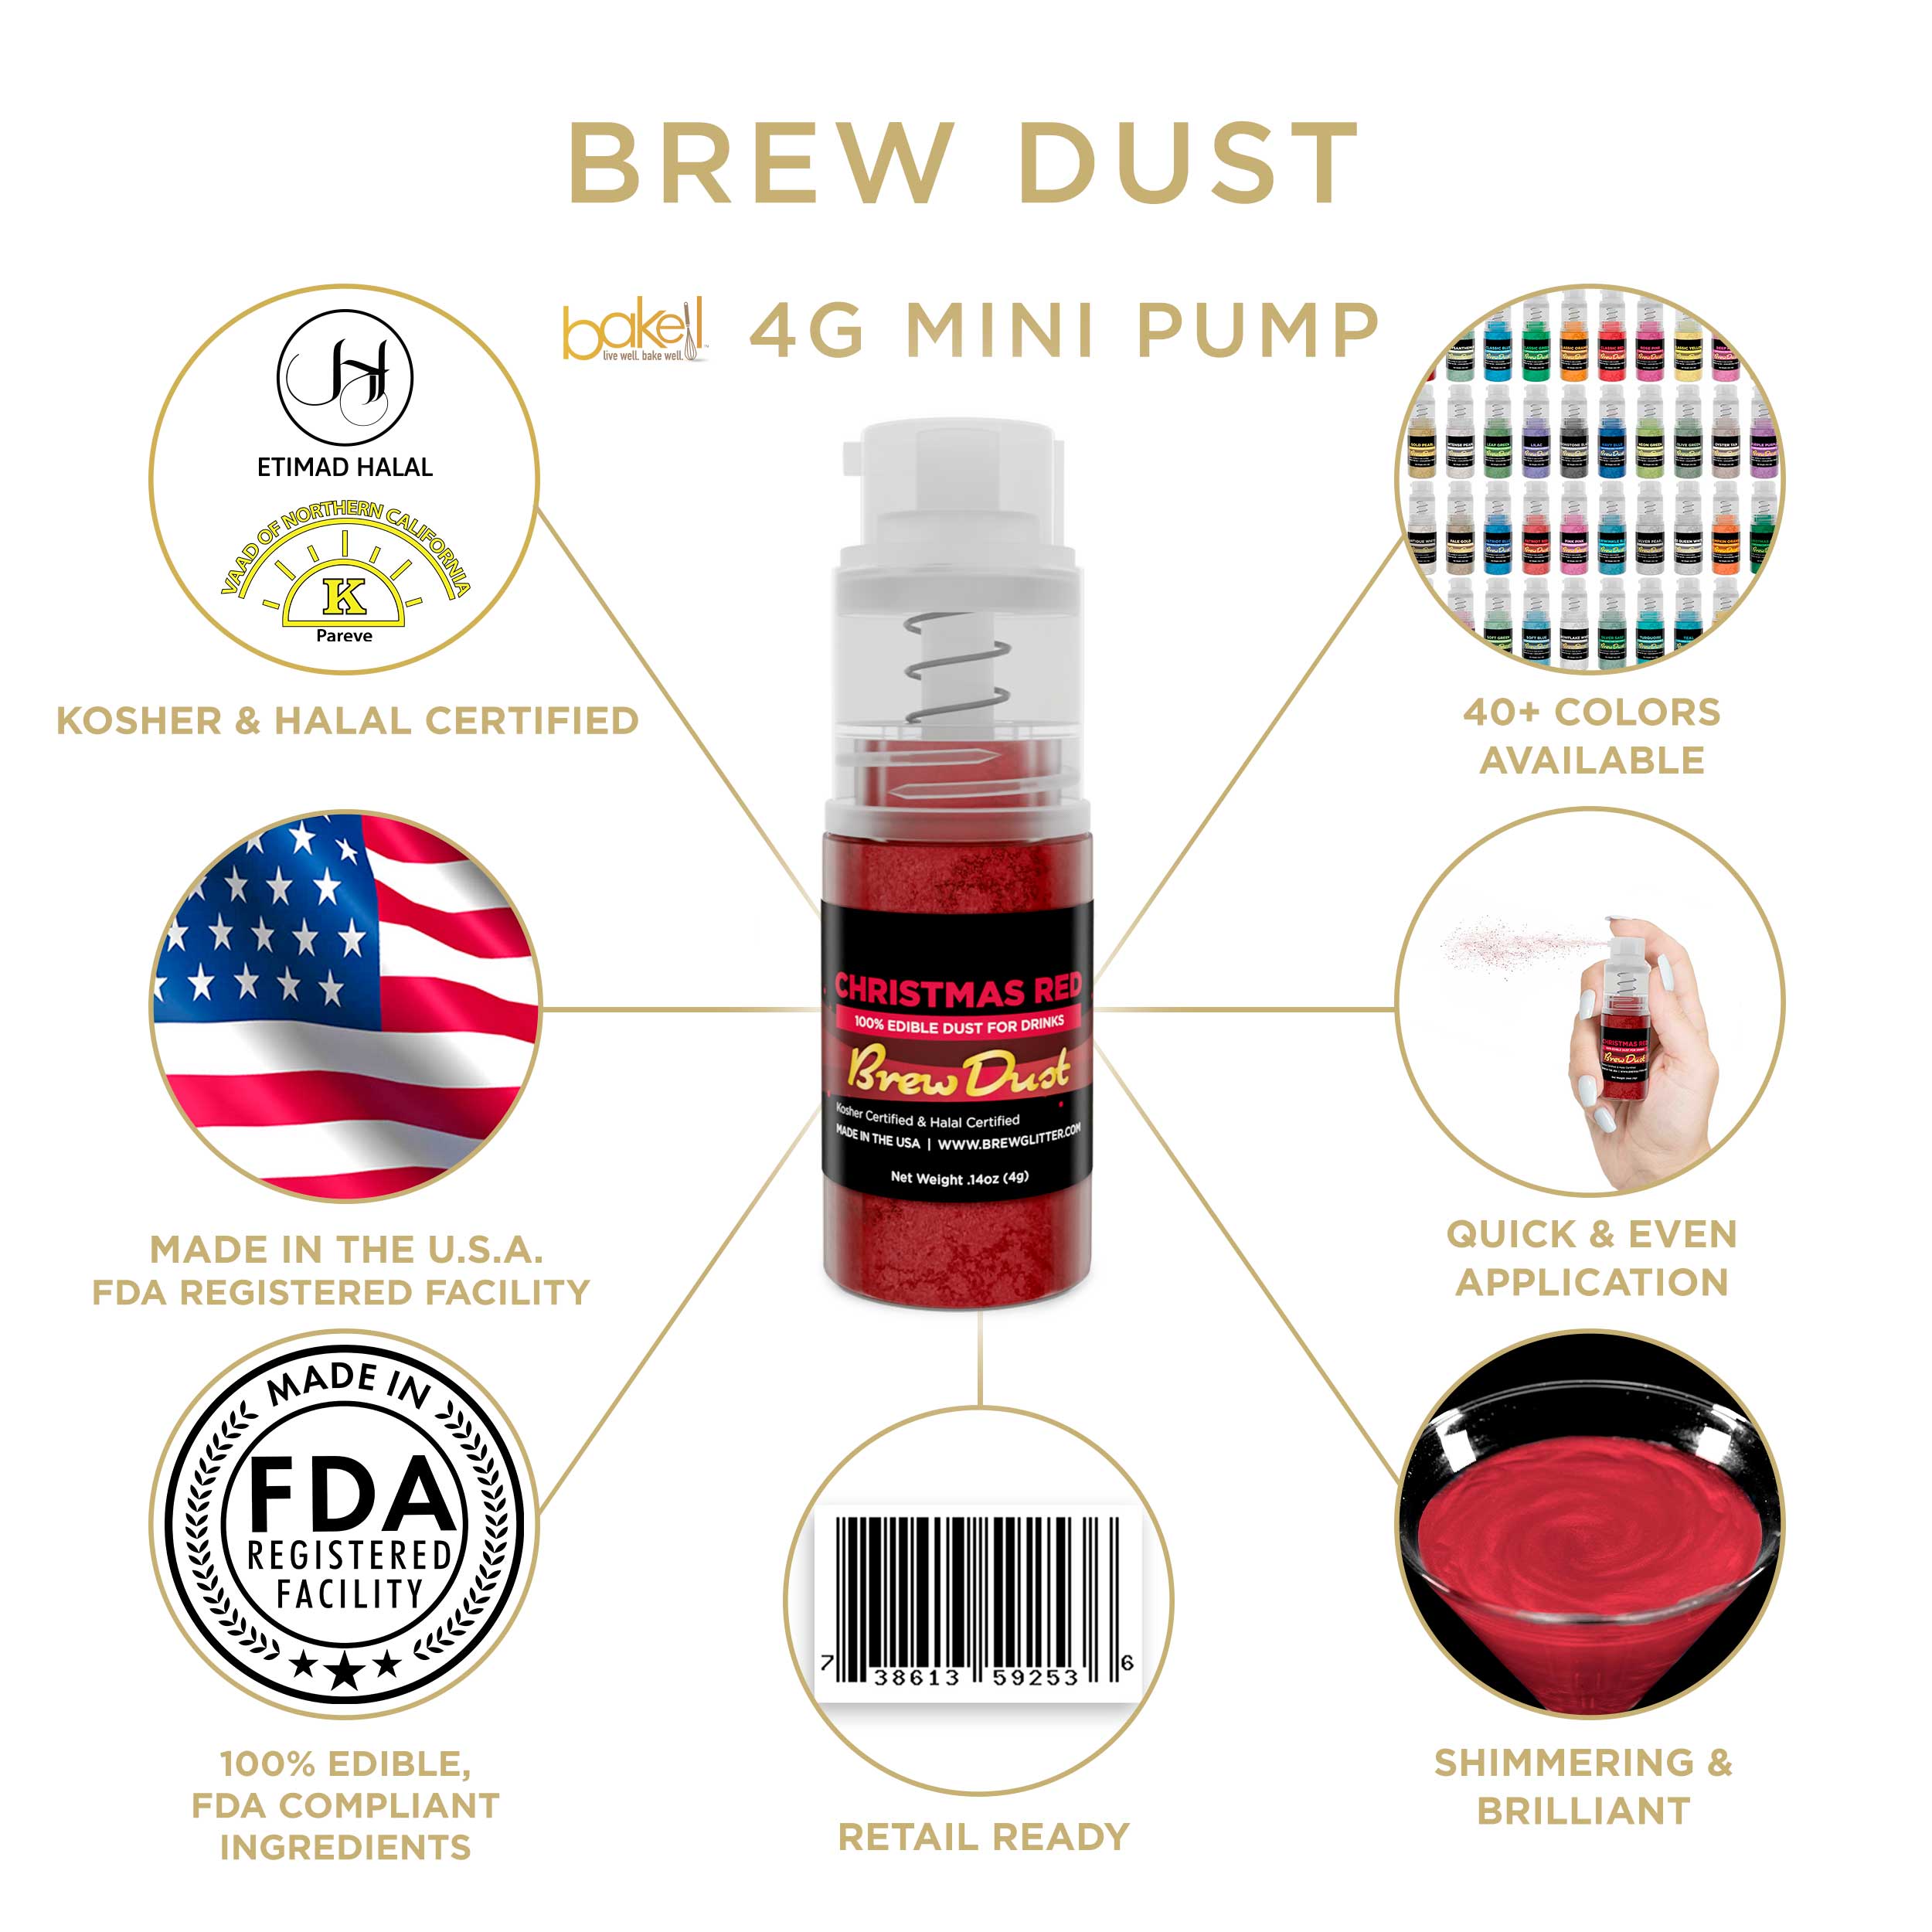 Christmas Red Brew Dust Miniature Spray Pump | Infographic and Information